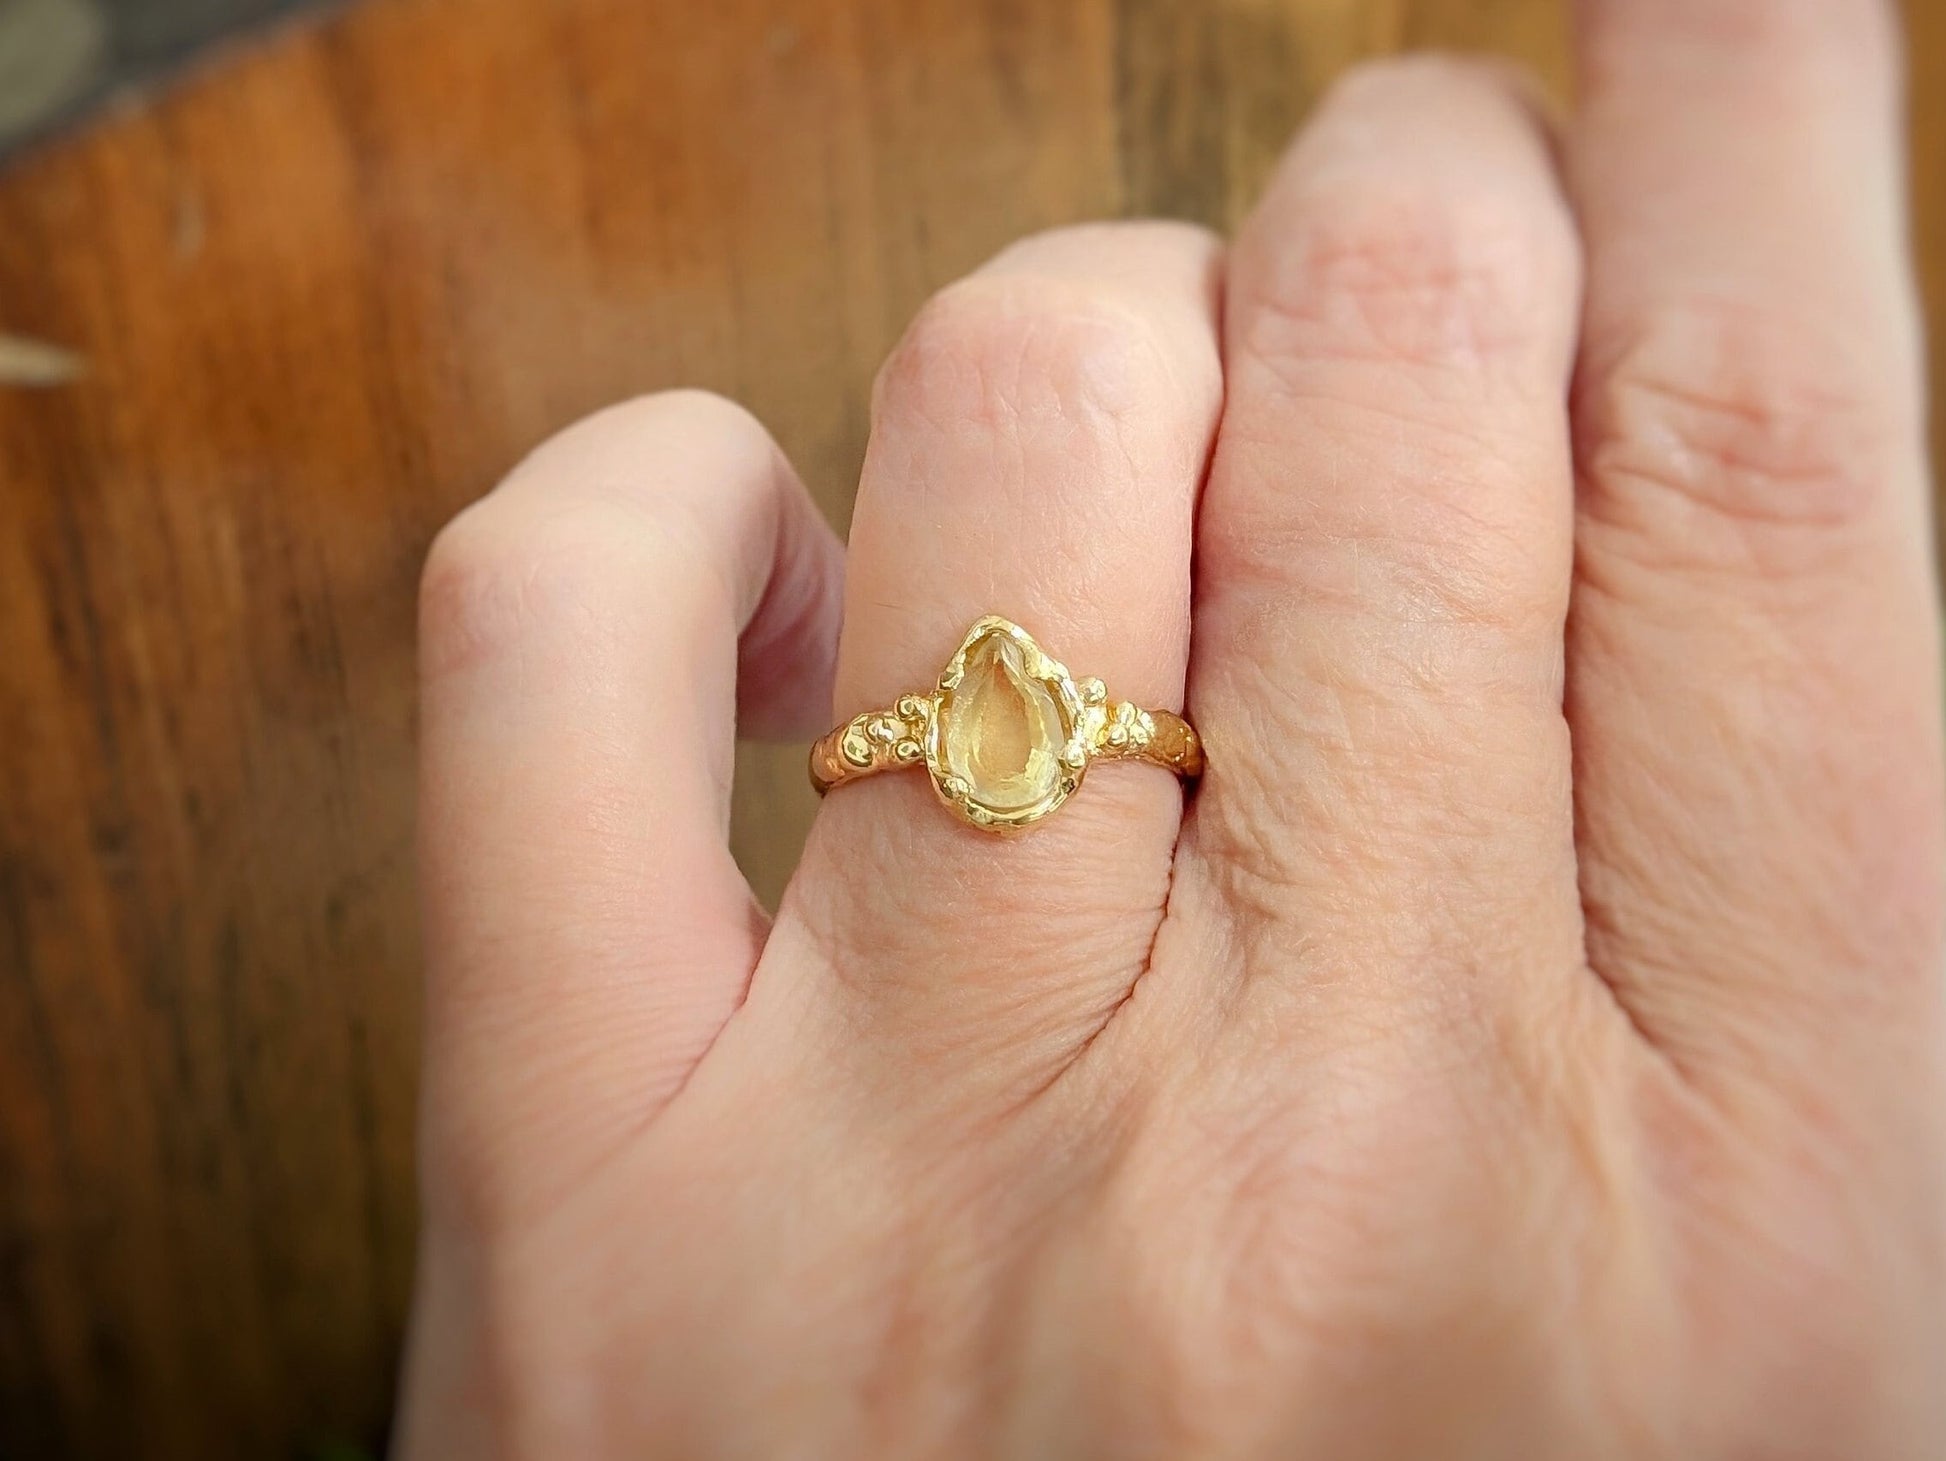 Large Pear shape Citrine set by prongs on a Solid 14k Gold Molten textured band worn on a woman's hand